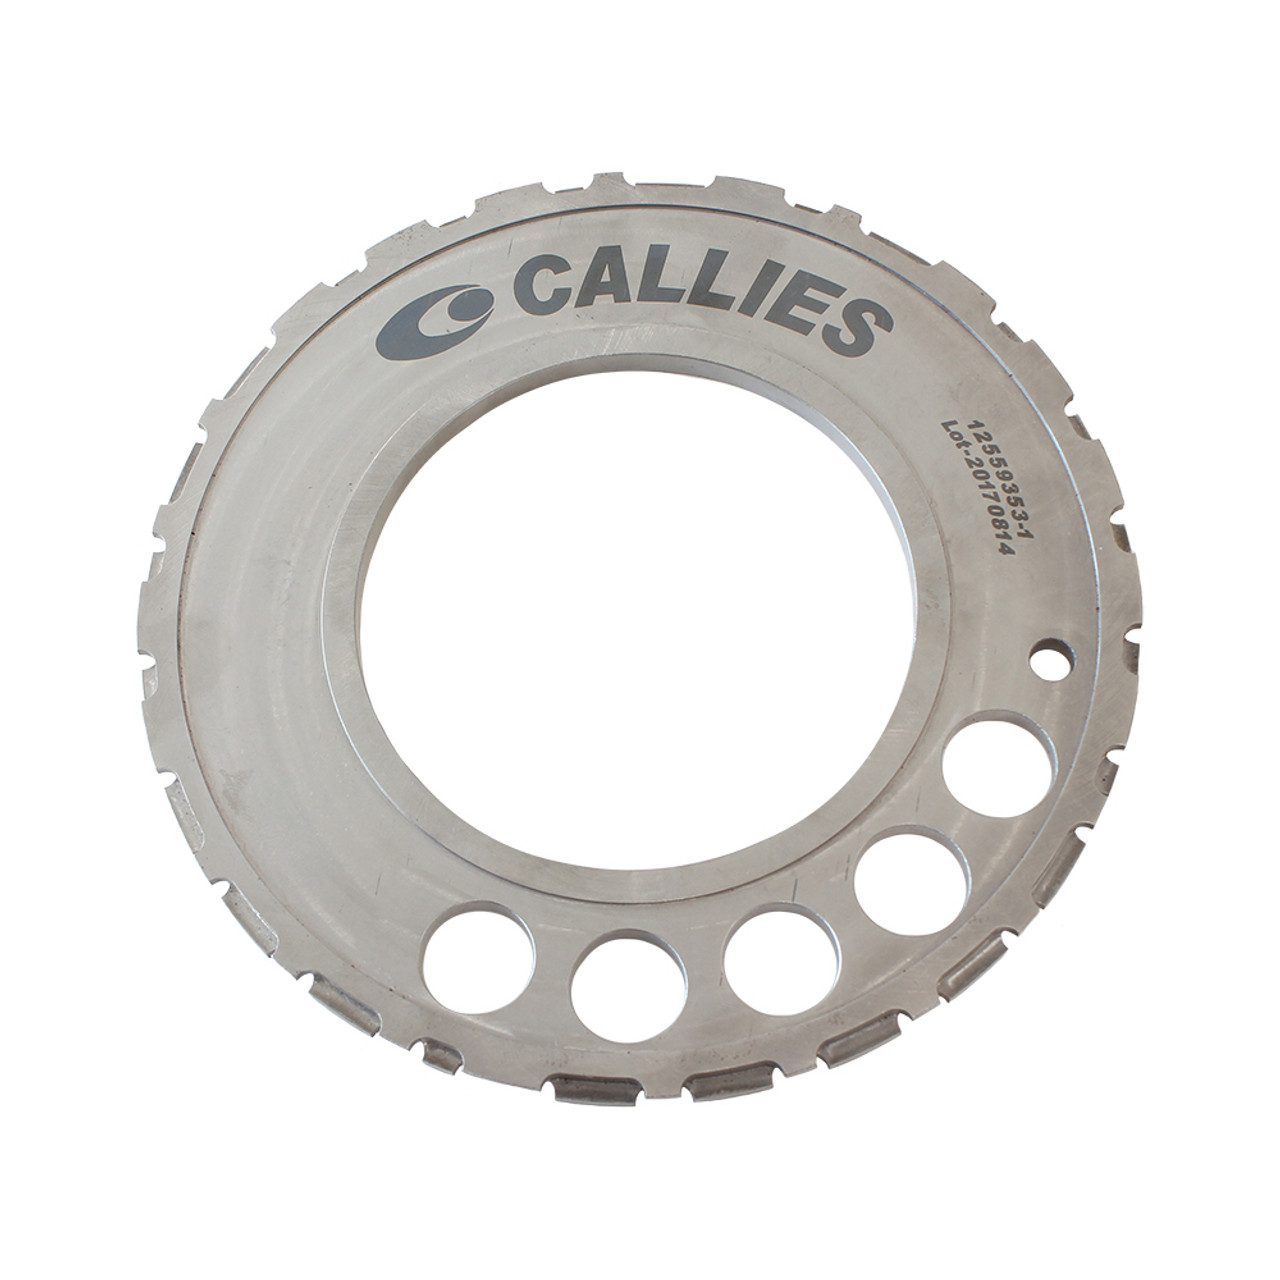 Billet Reluctor Wheel - 24-tooth GM LS